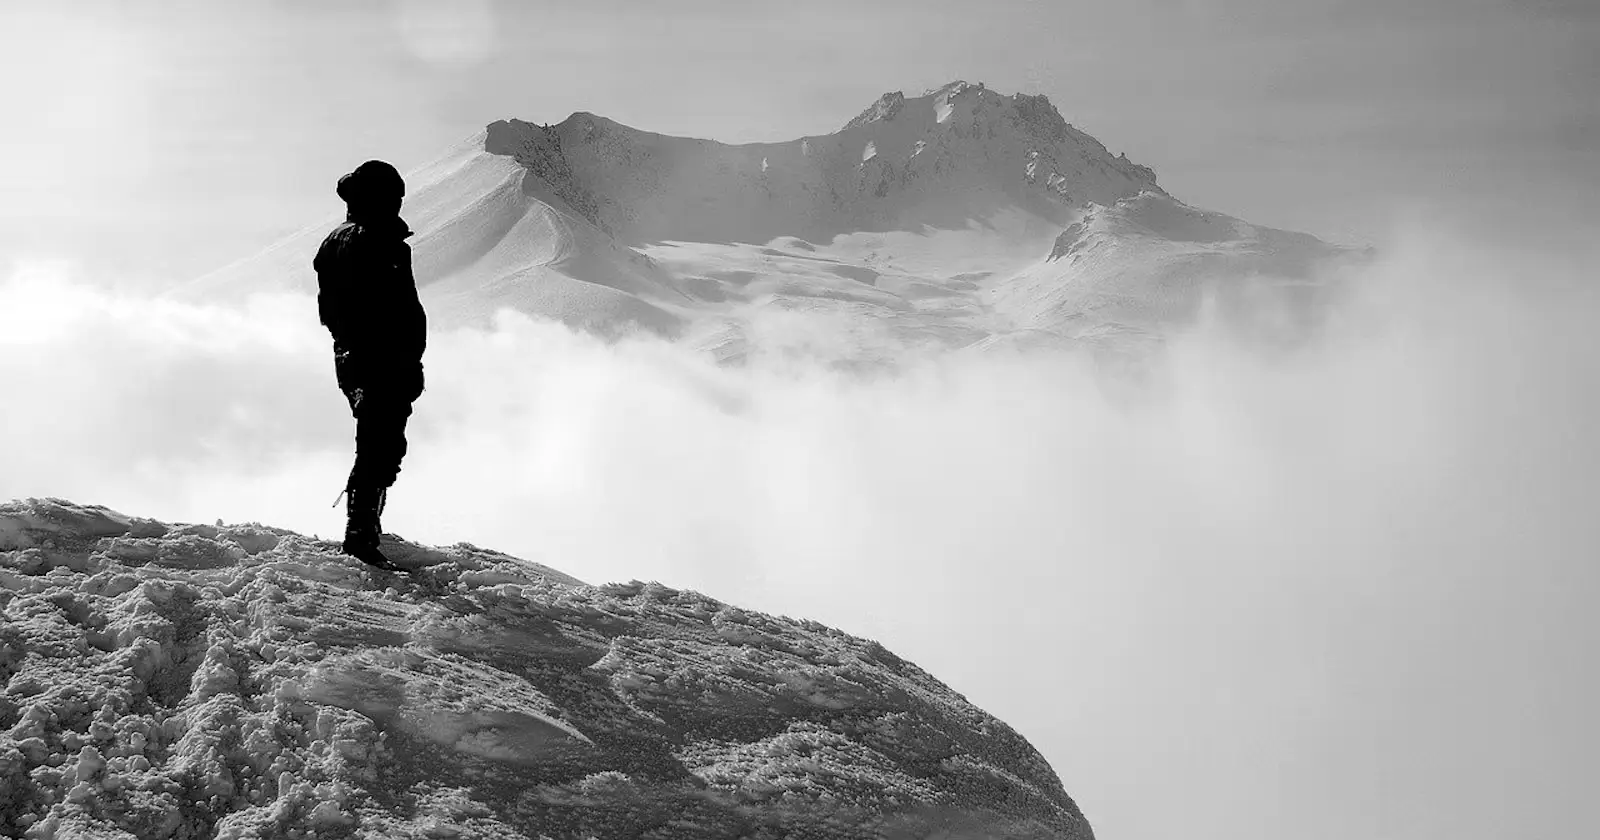 A man on a mountain peak, surrounded by clouds. Majestic view, inspiring heights. Nature's beauty captured in 'Pathways' poem.